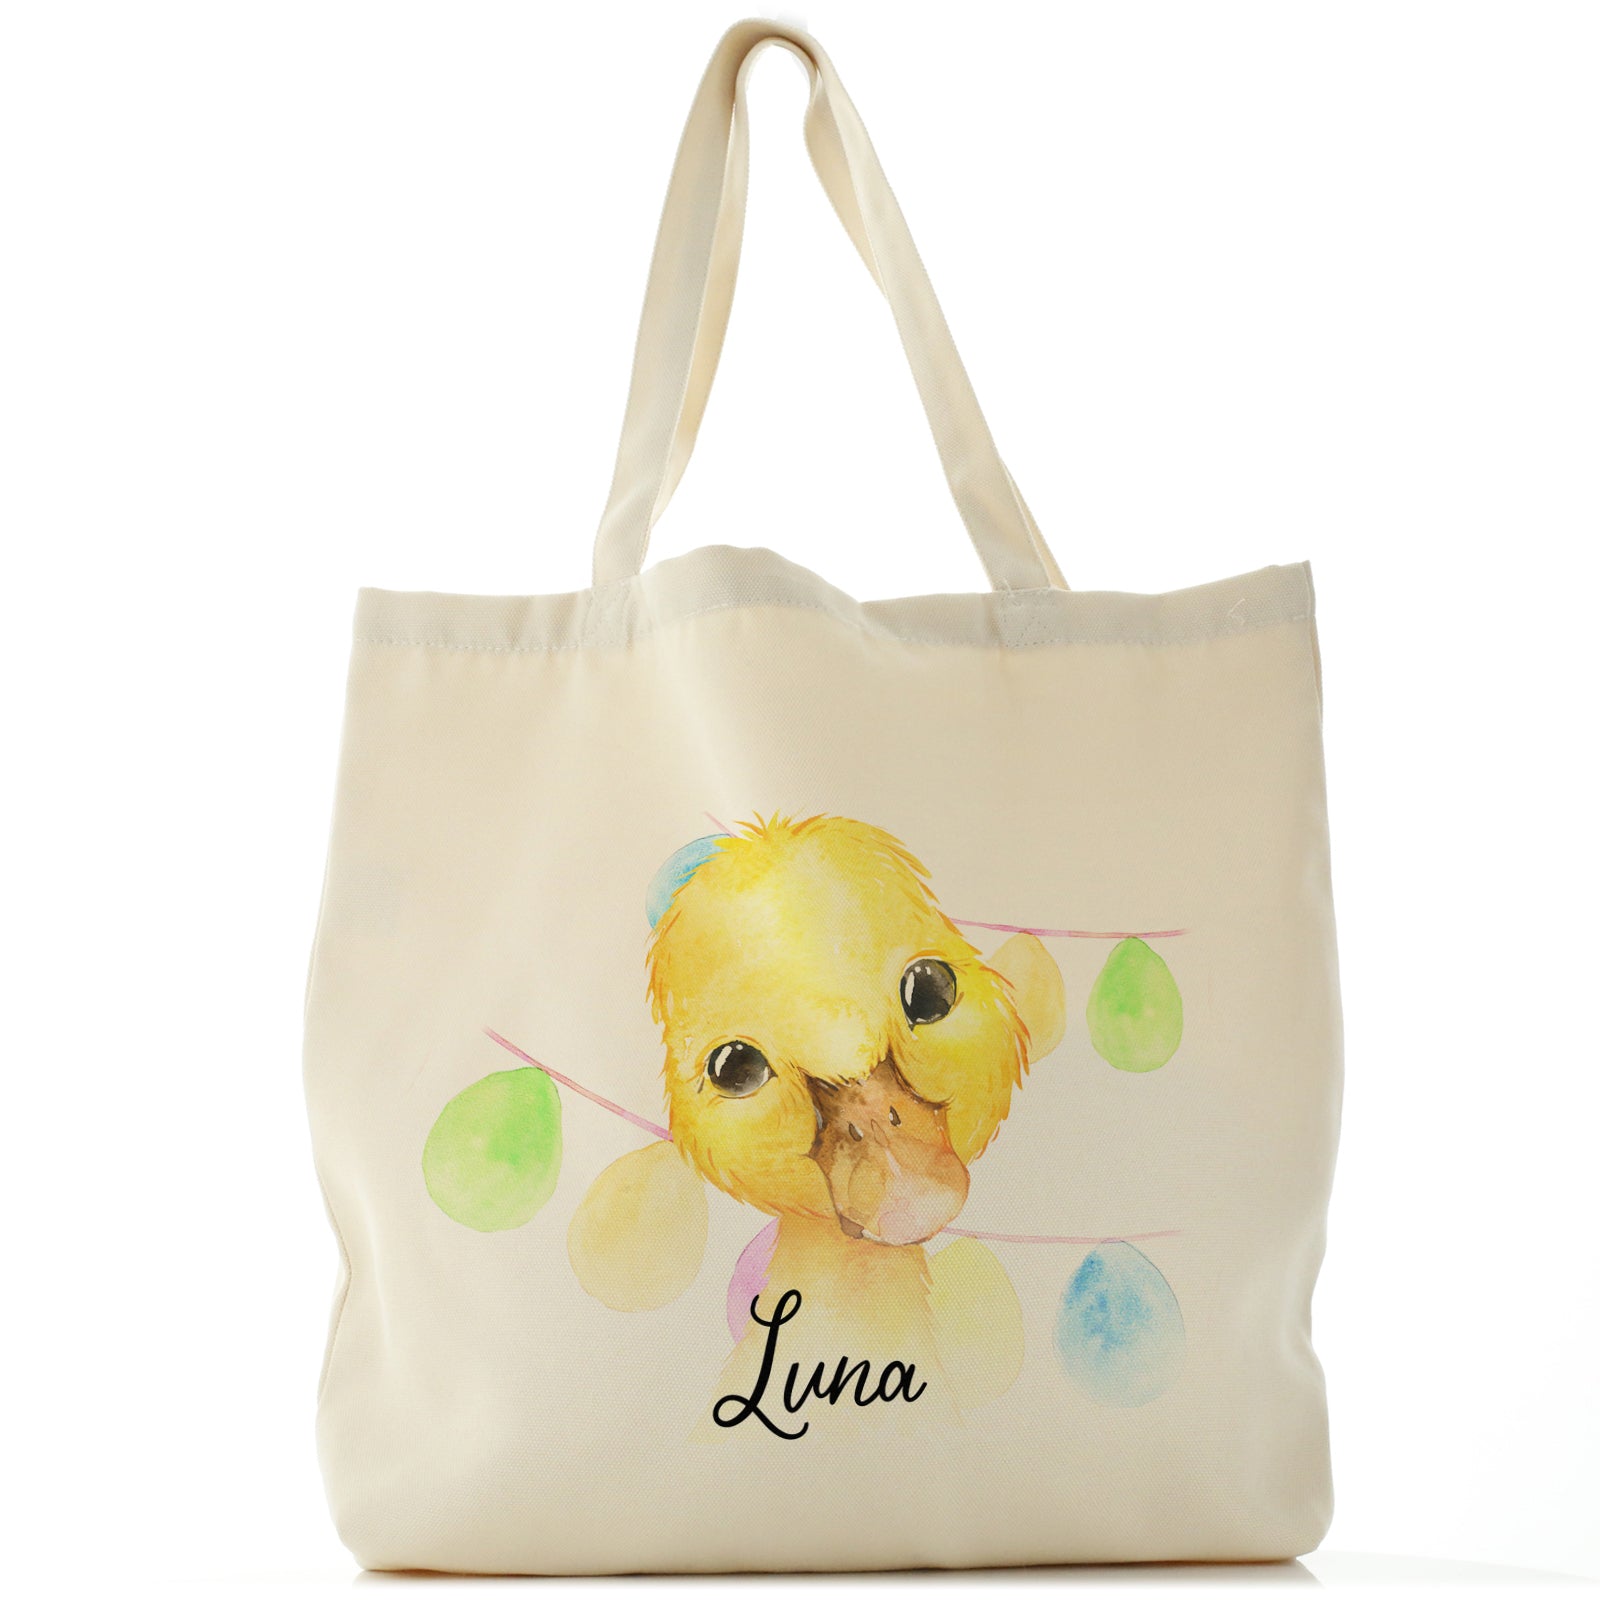 Personalised Canvas Tote Bag with Yellow Duck Multicolour Buntin and Cute Text